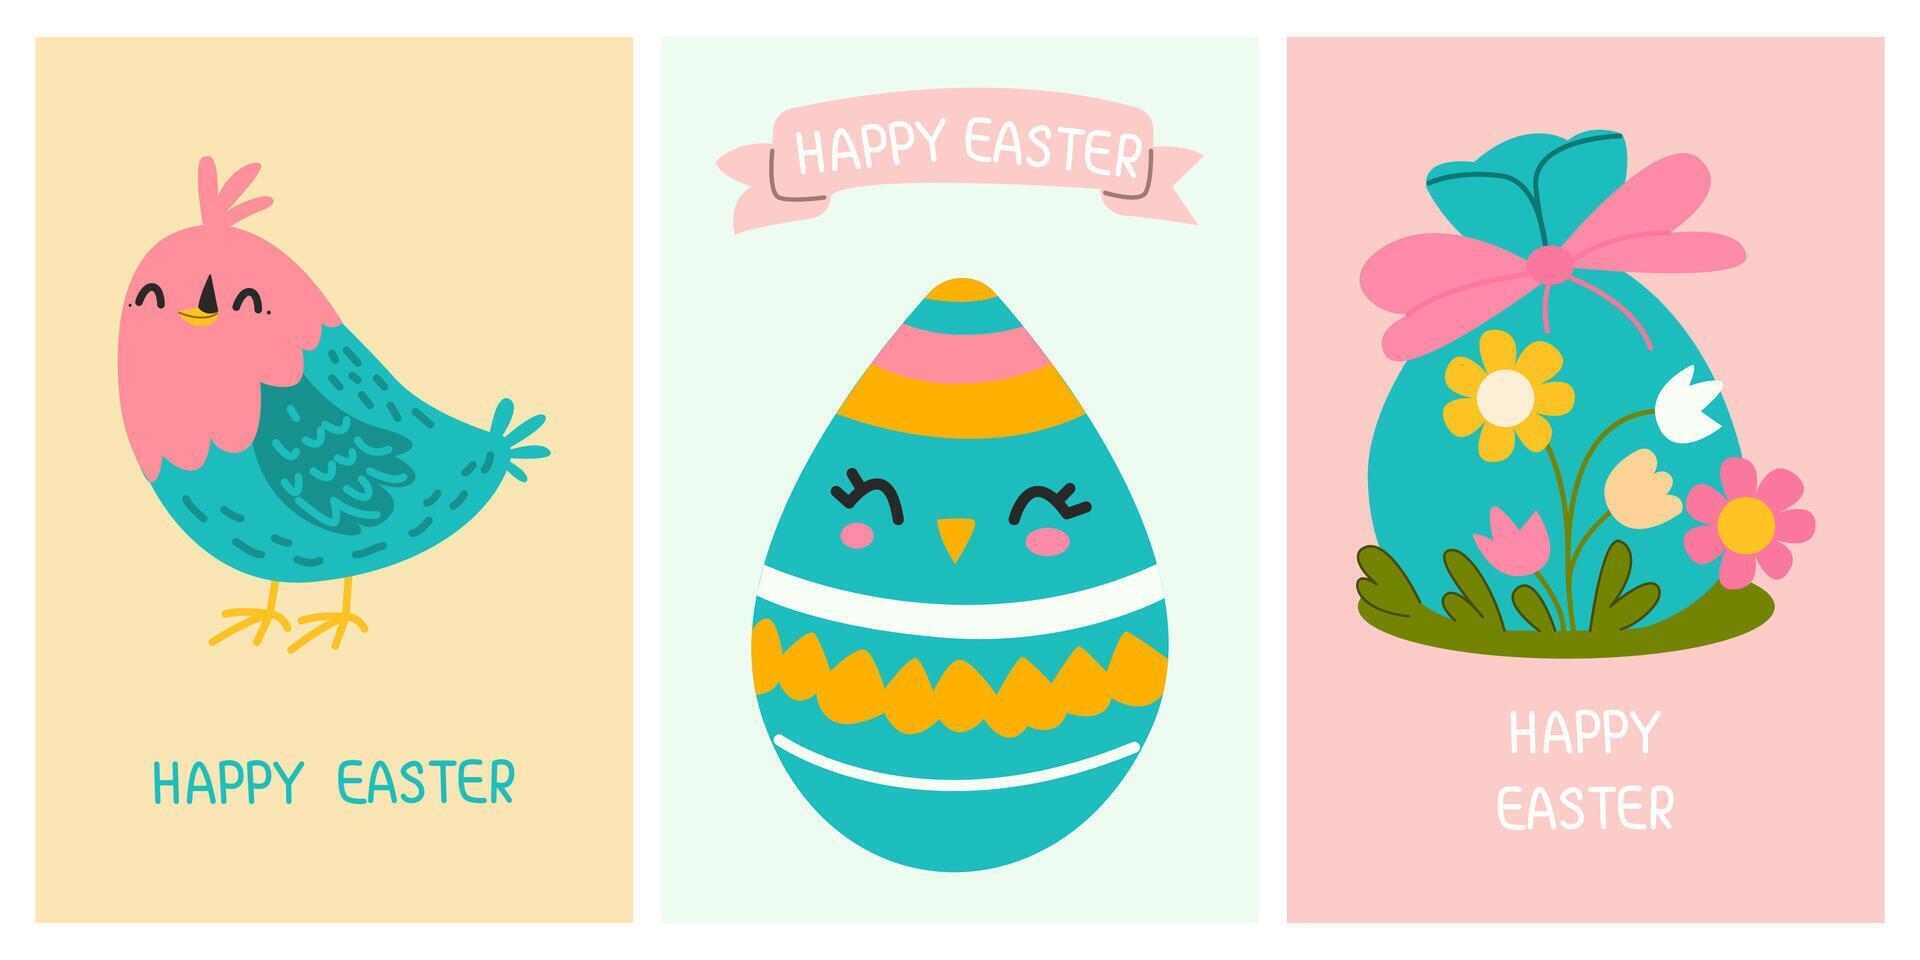 Greeting cute cards for the Easter holiday. Bird, cute bag, Easter egg. For posters, cards, scrapbooking, stickers vector